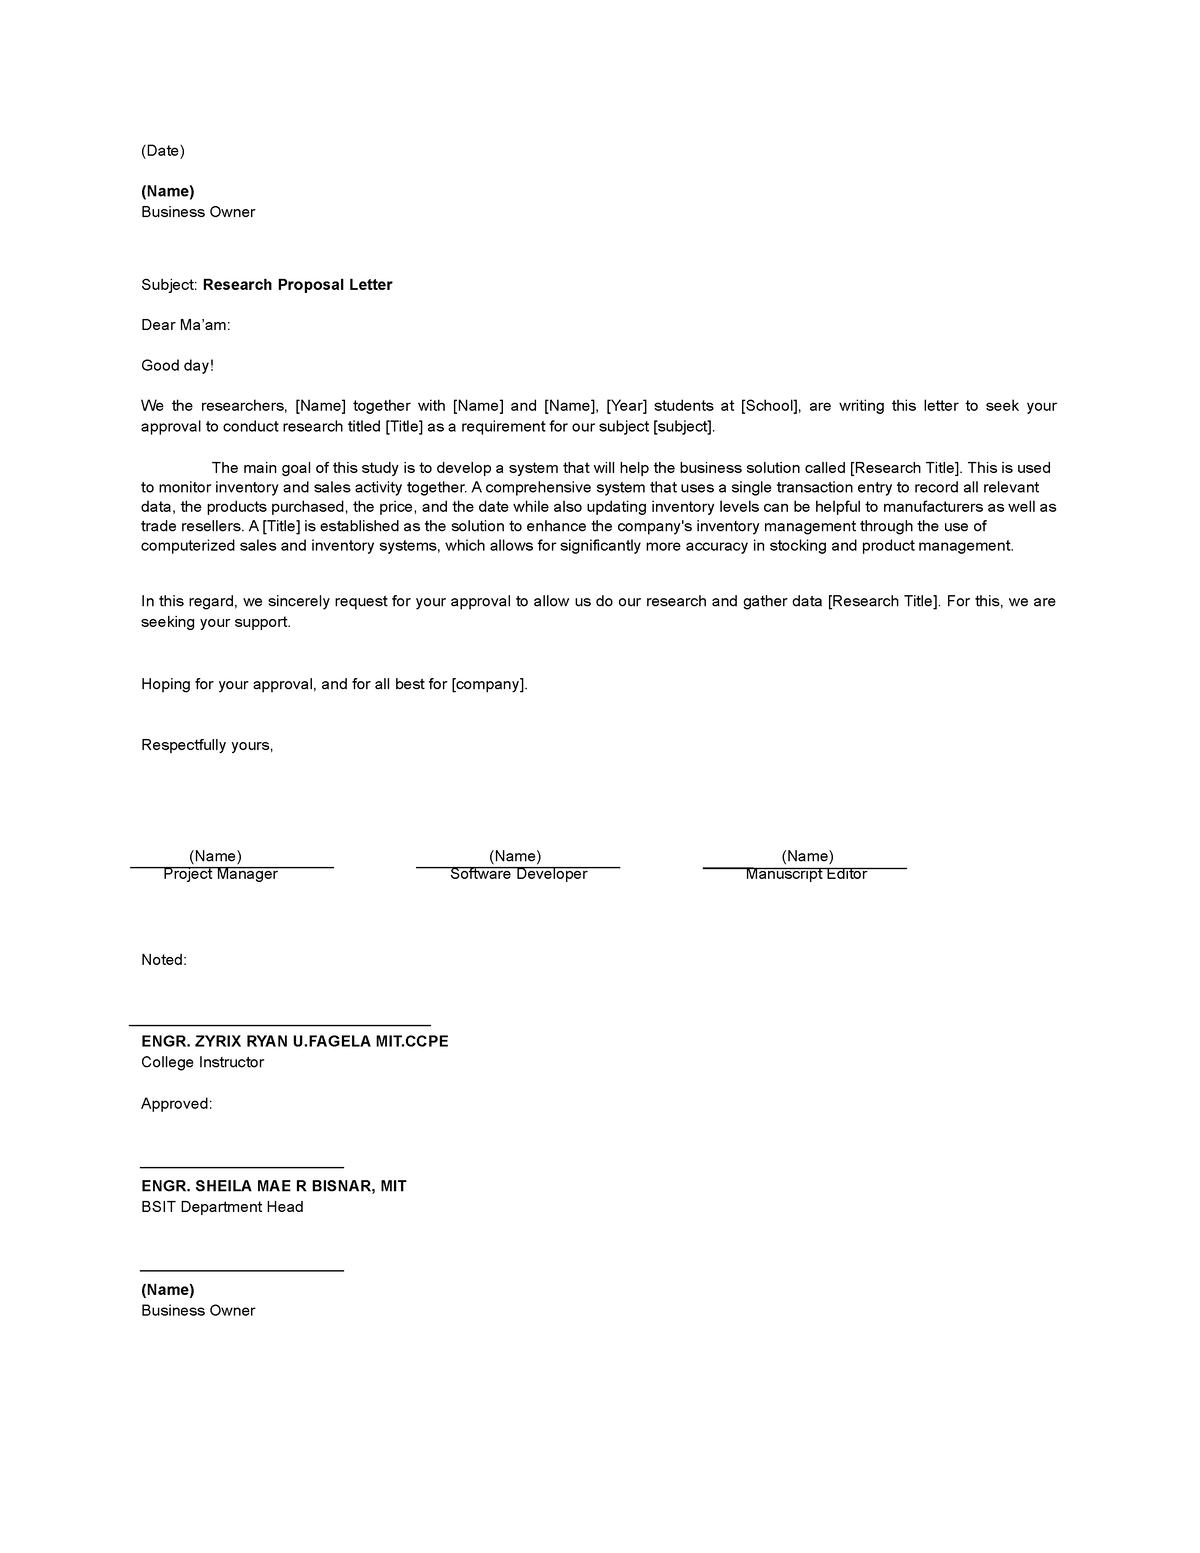 Client-Letter-Format - (Date) (Name) Business Owner Subject: Research ...